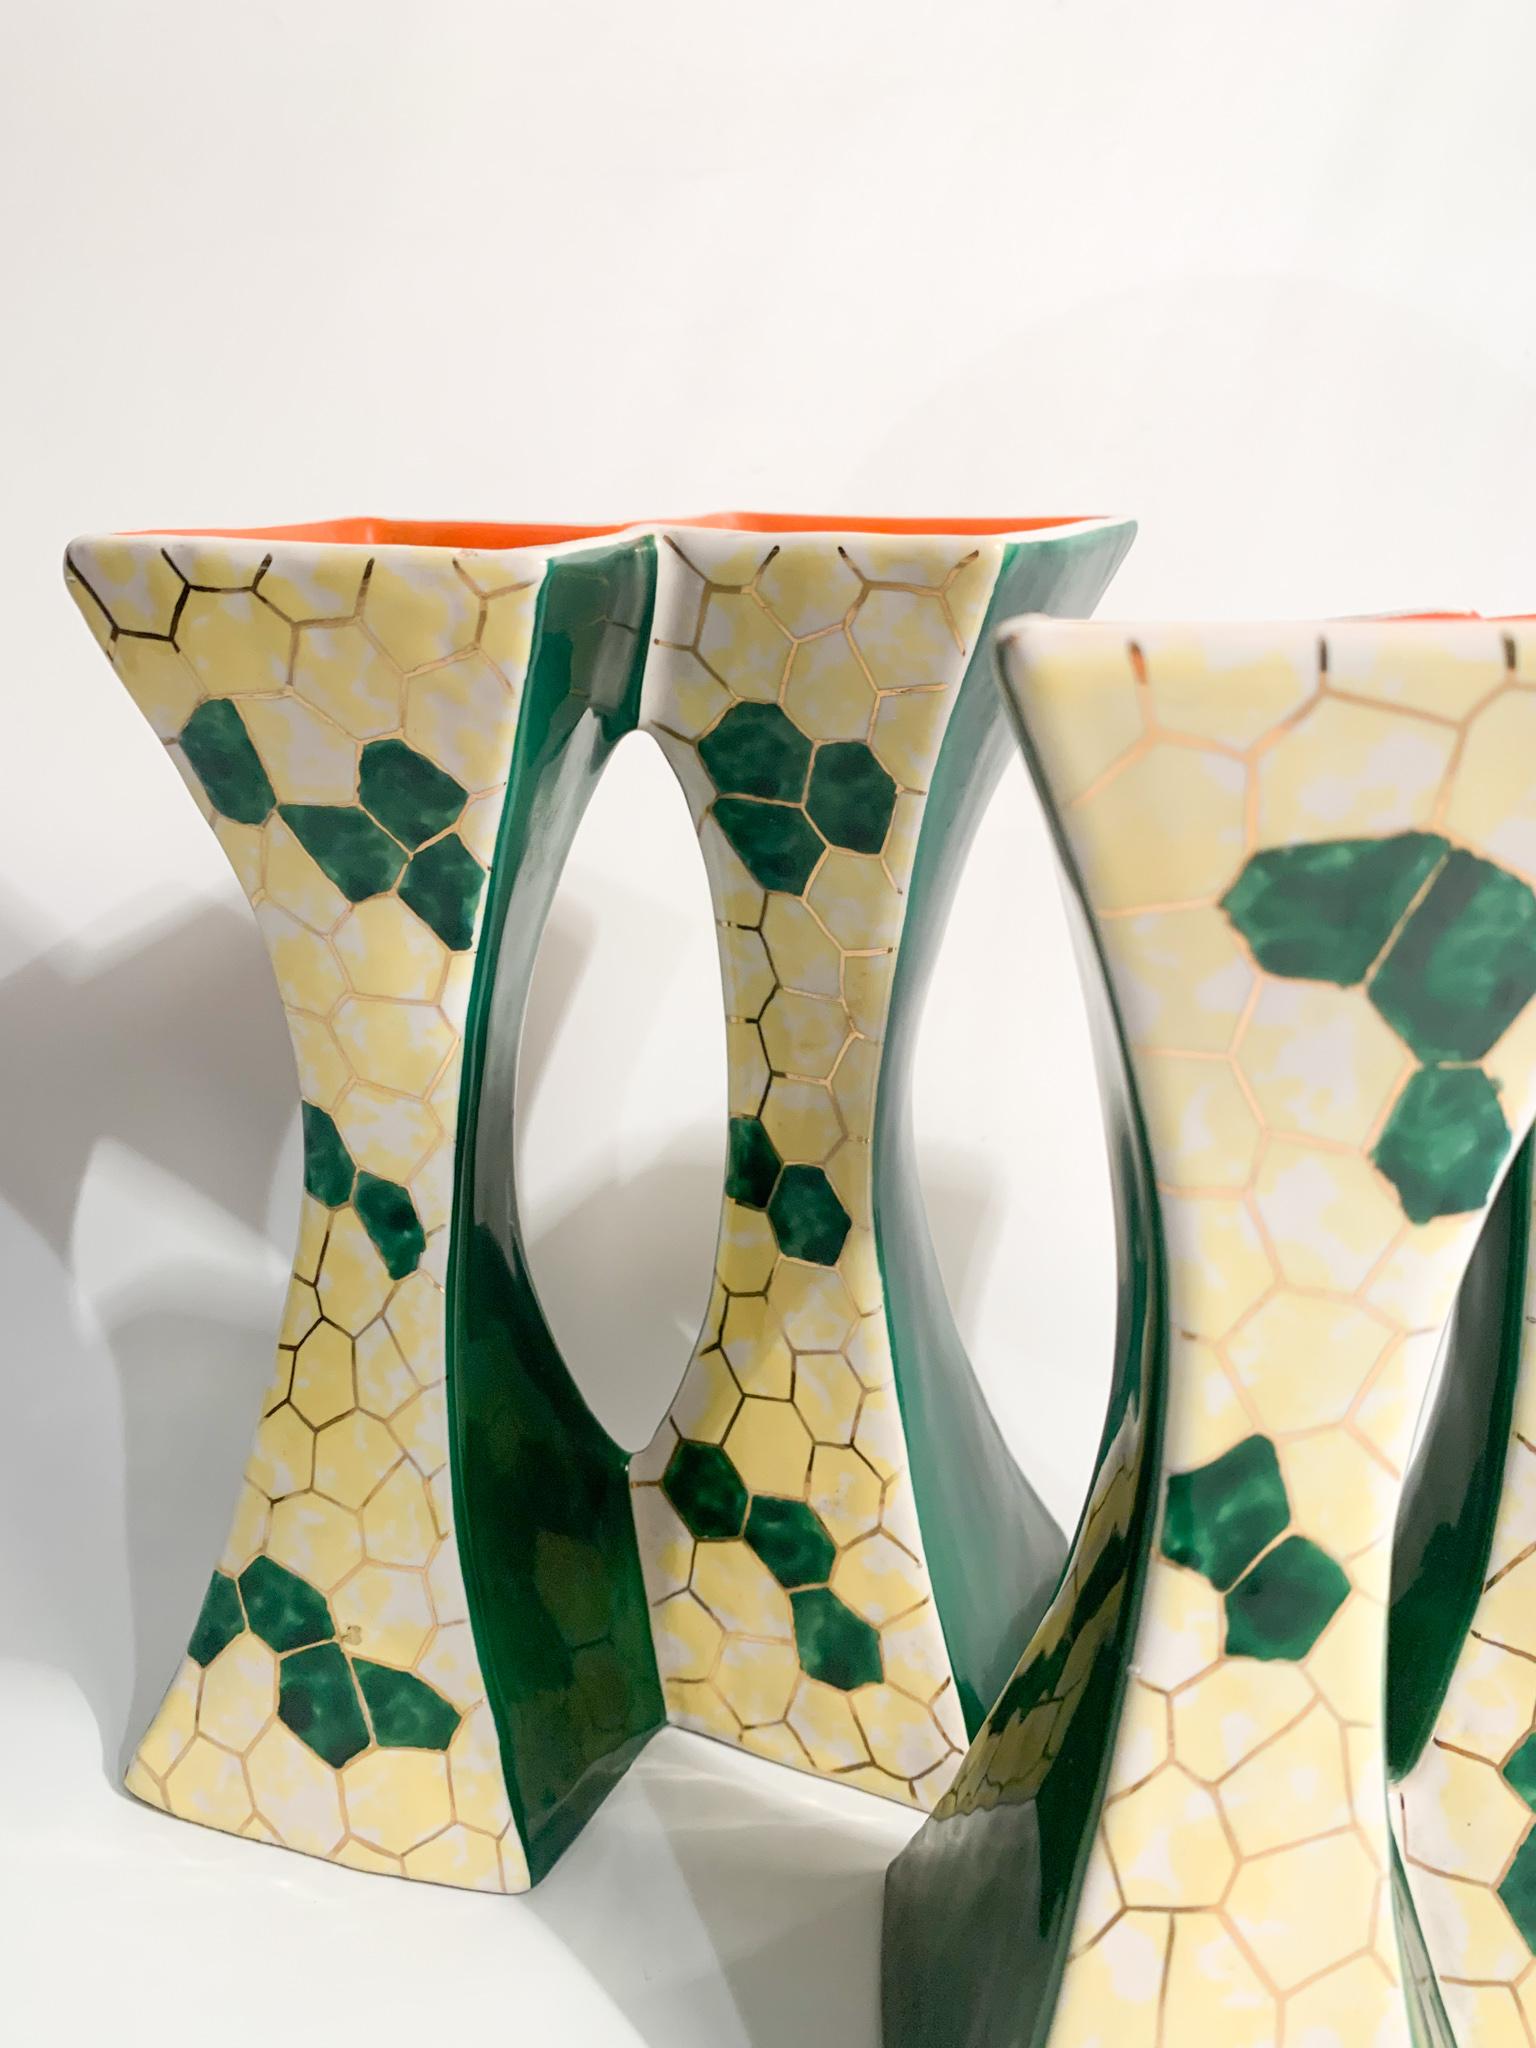 Mid-20th Century Pair of Italian Ceramic Candle Holders by Pucci Umbertide from the 1950s